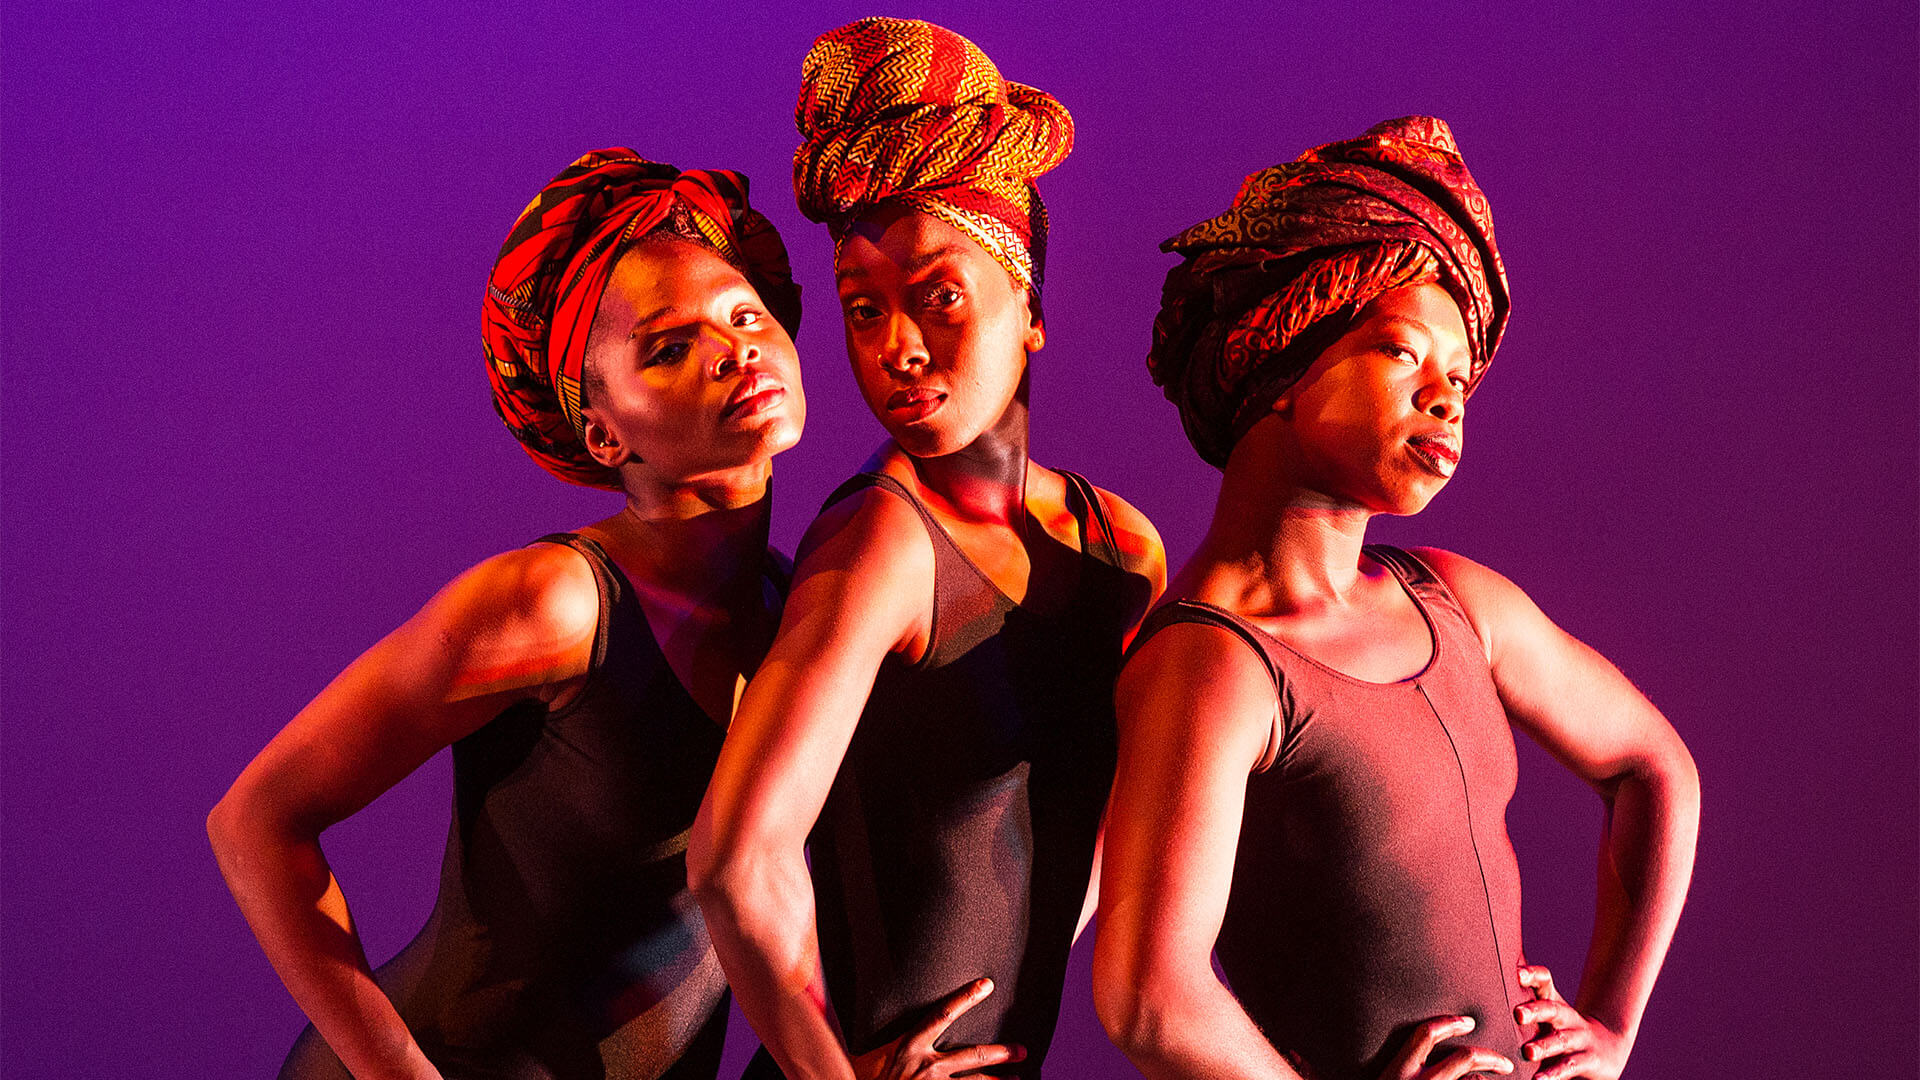 Three black women pose and look confidently at us with their hands on their hips. The stage is lit with warm, purple light.